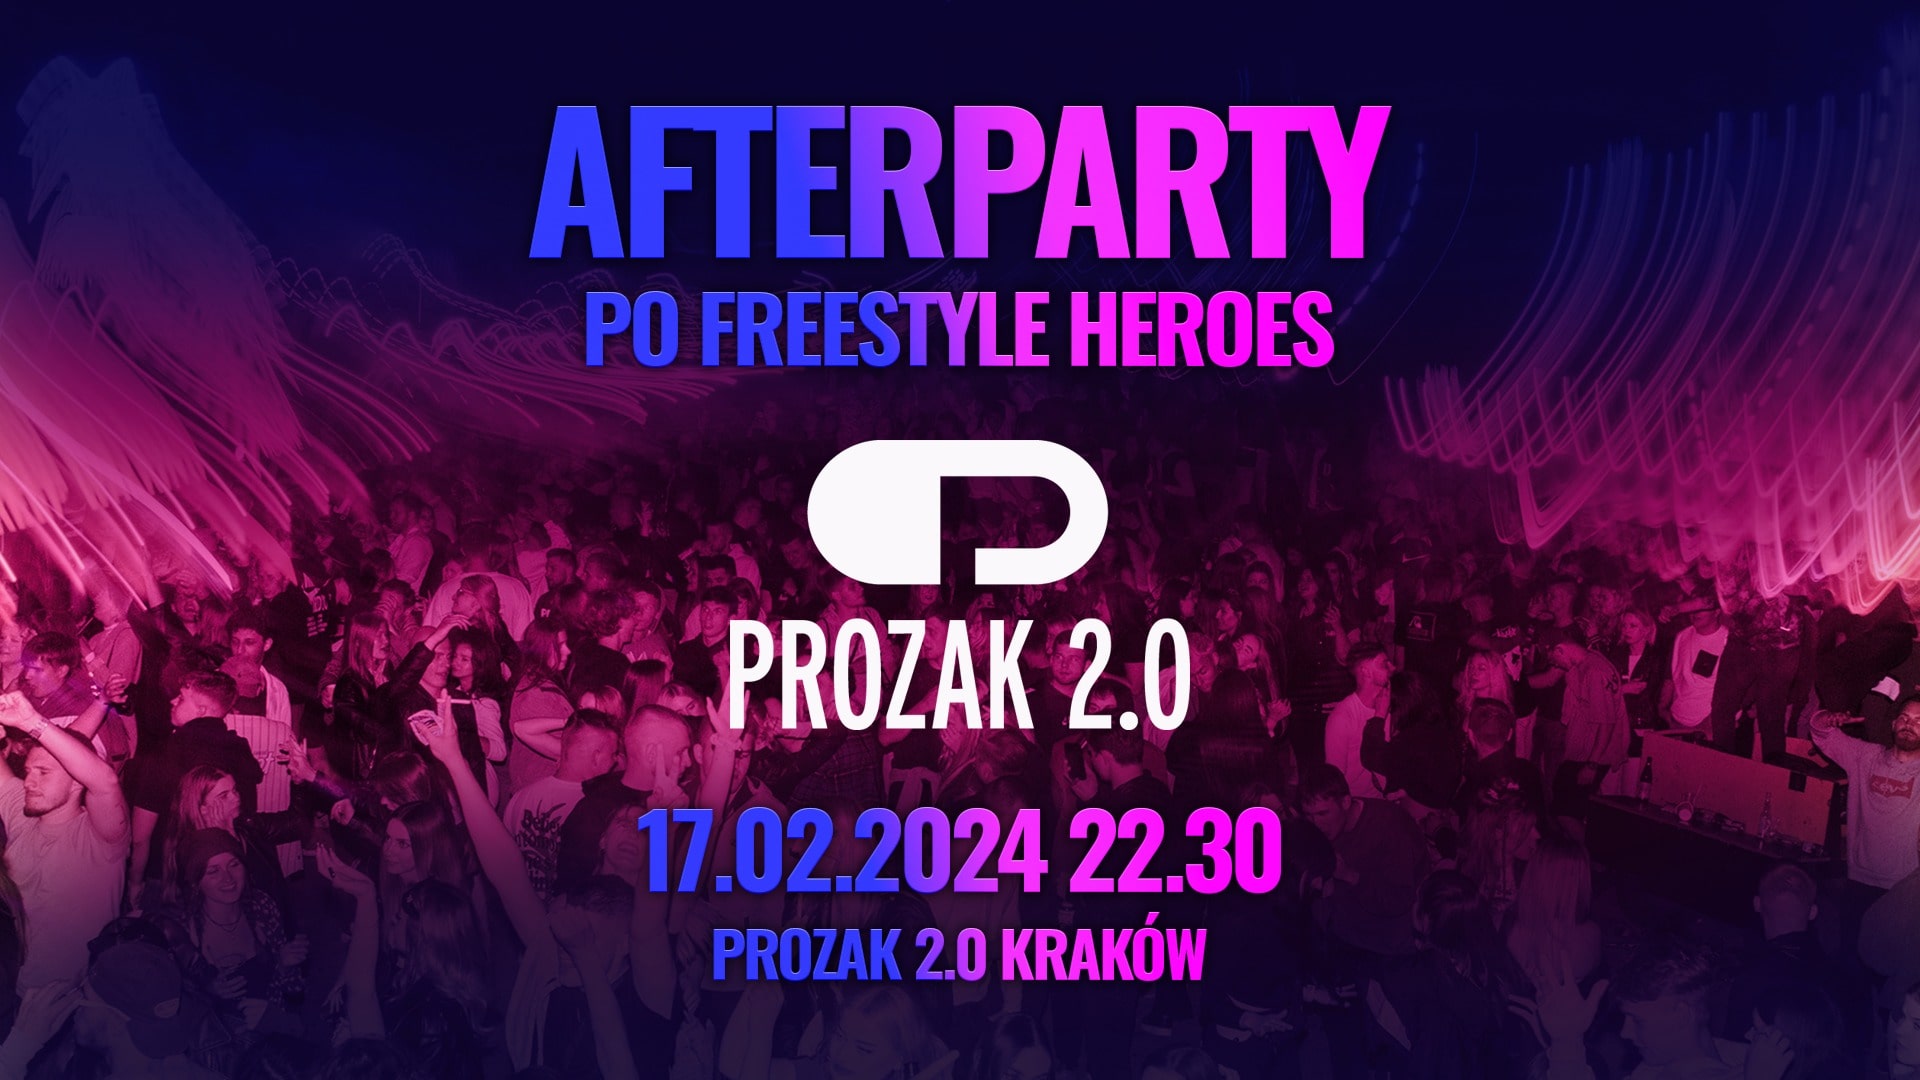 AFTERPARTY FREESTYLE HEROES – PROZAK 2.0